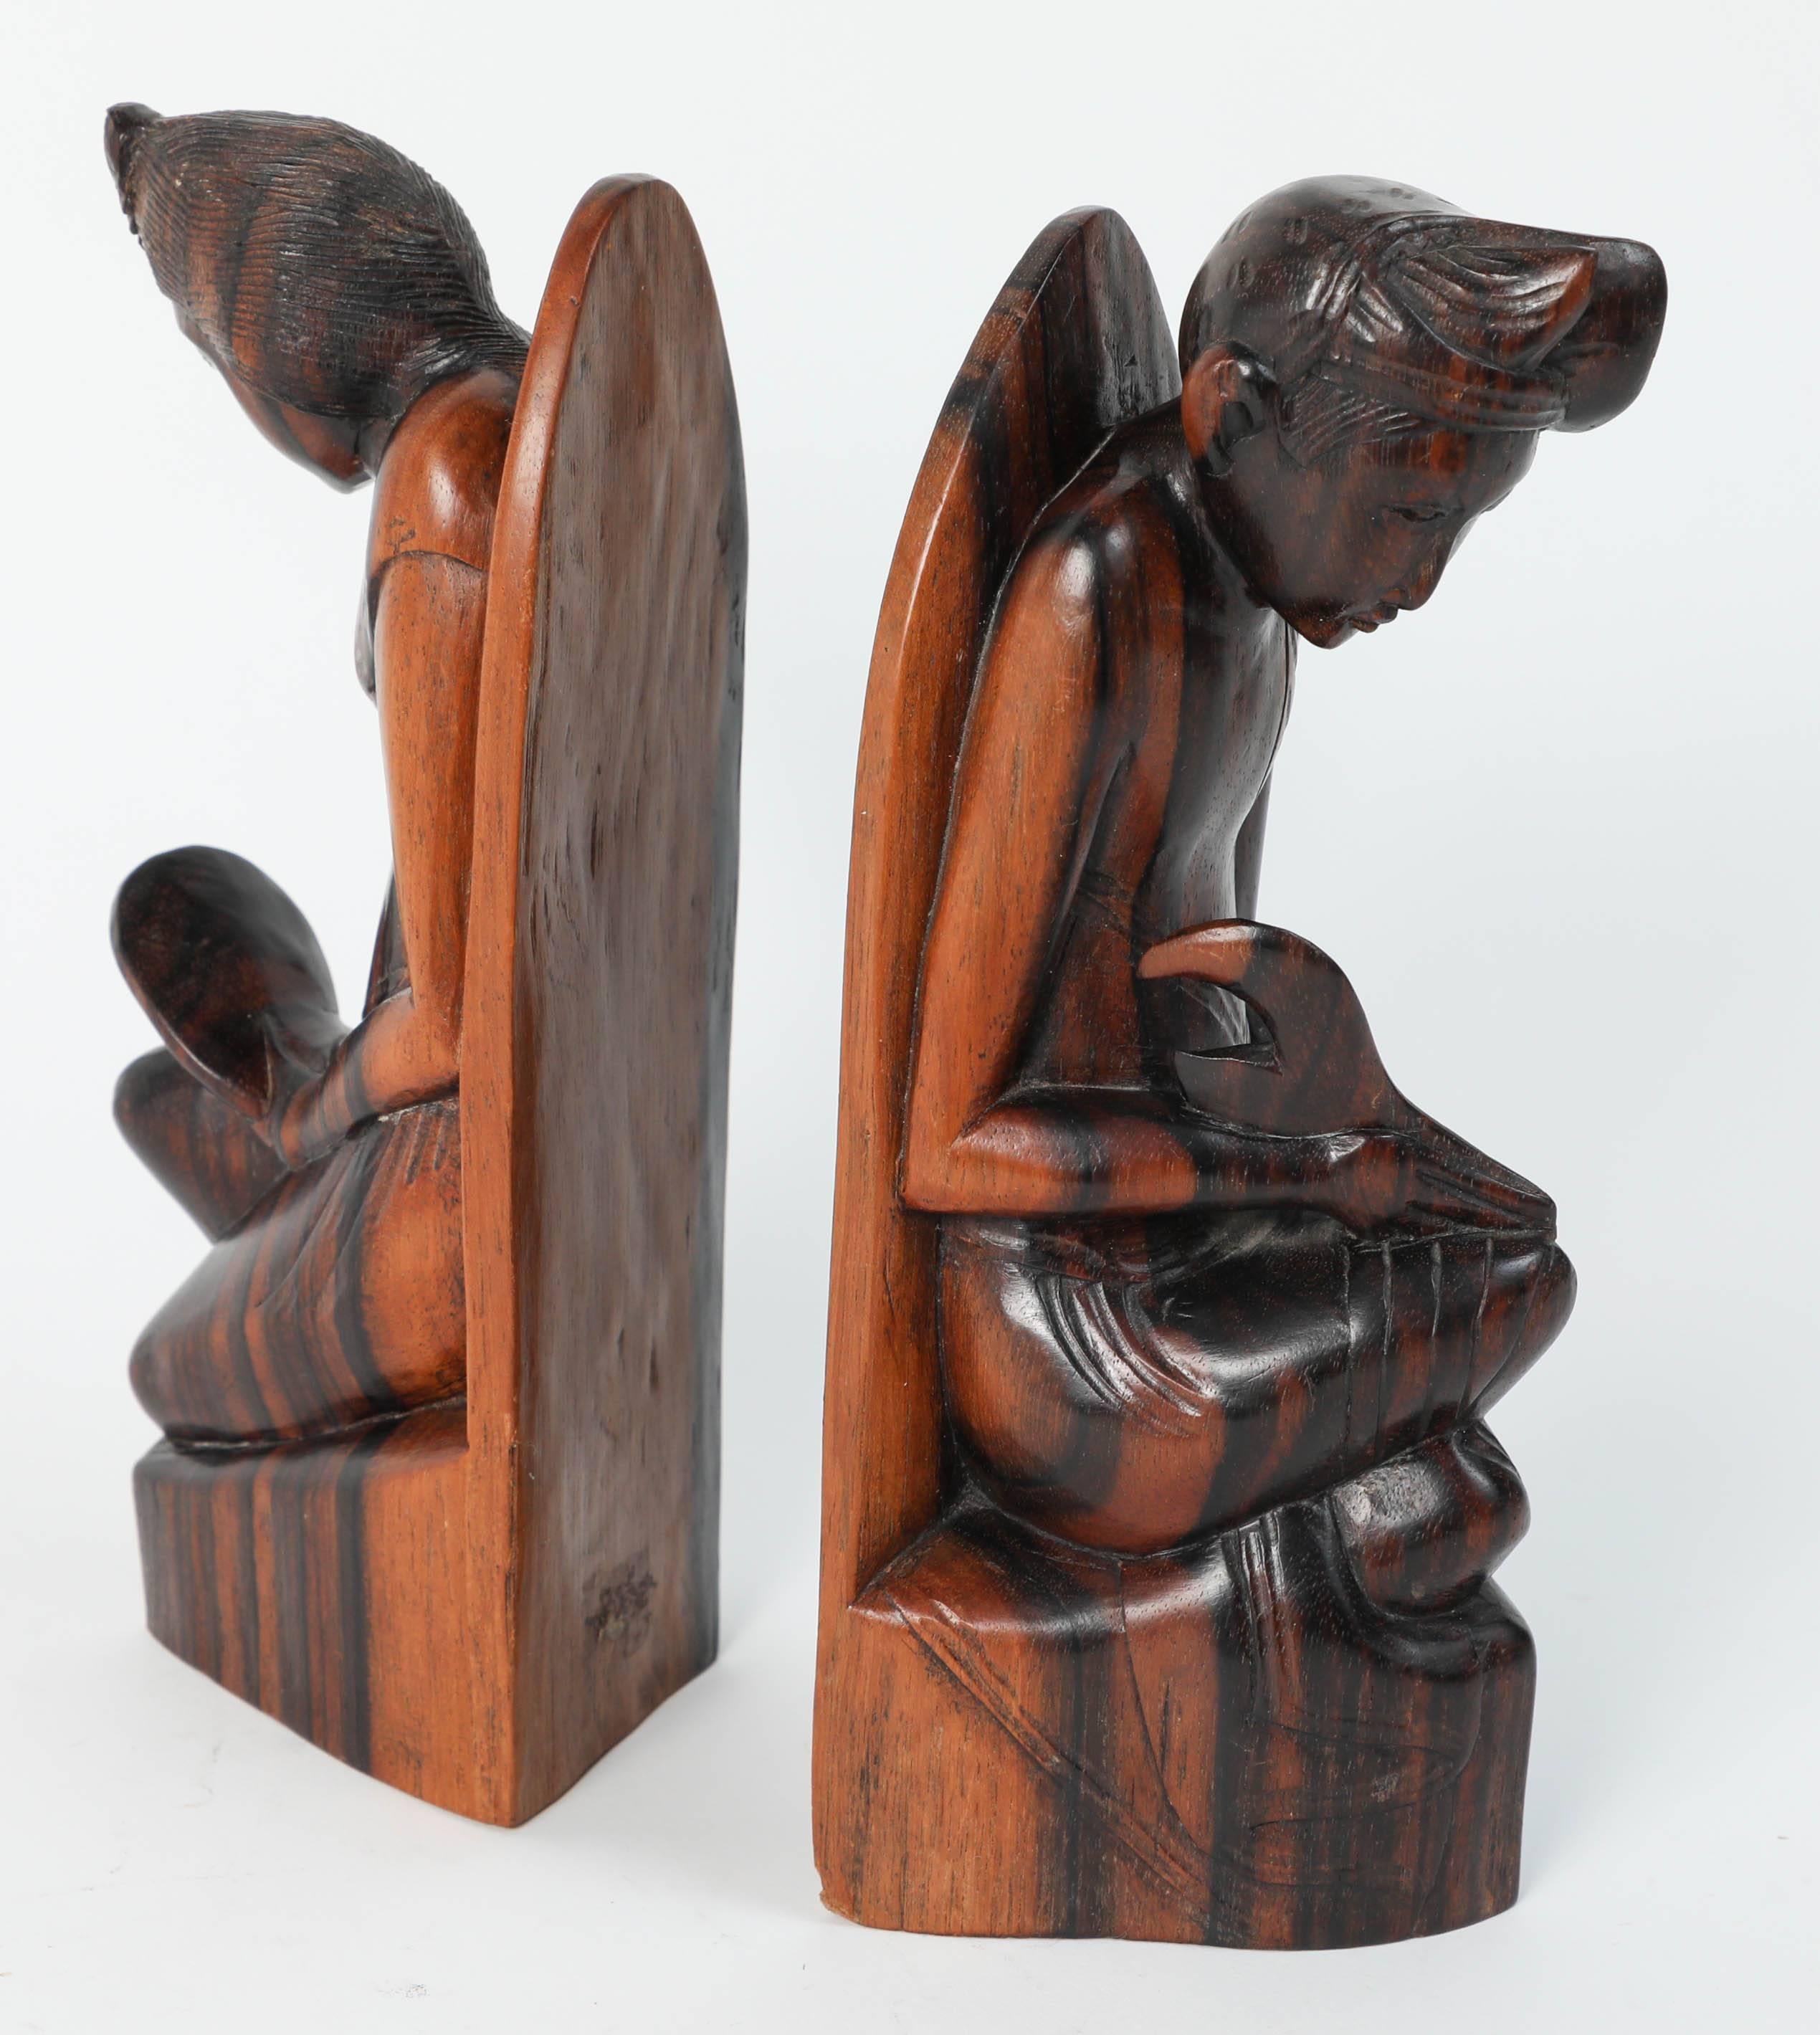 Vintage midcentury hand-carved wooden Balinese bookends.
Hand-carved sculpture in wood depicting a Balinese couple.
Dimensions: 7